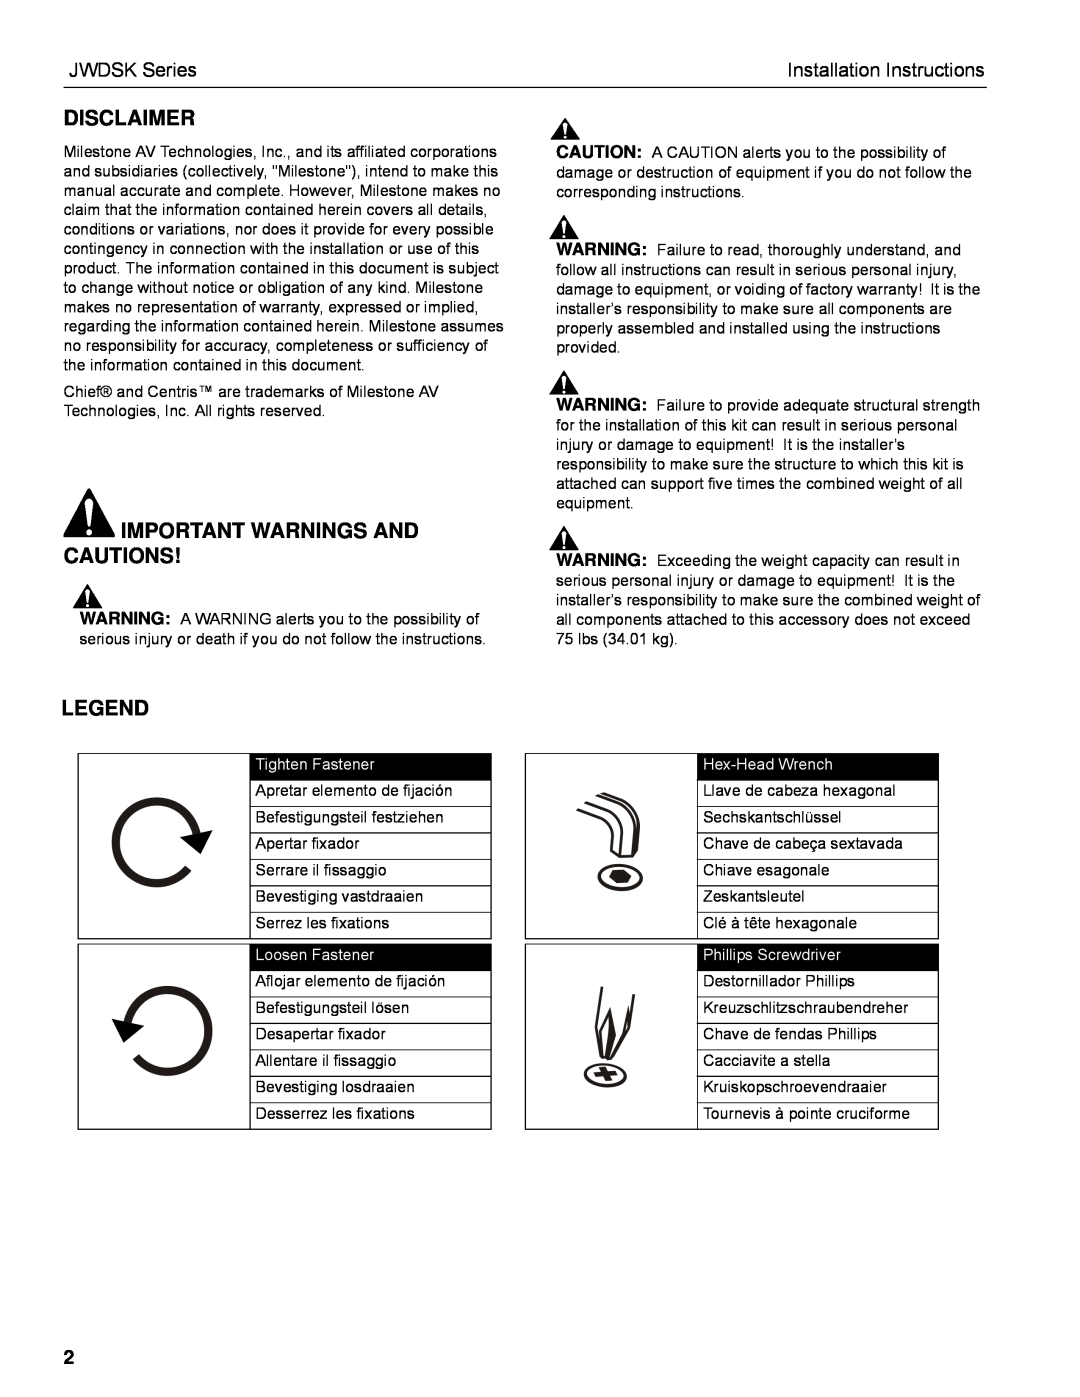 Chief Manufacturing Disclaimer, Important Warnings And Cautions, JWDSK Series, Installation Instructions 